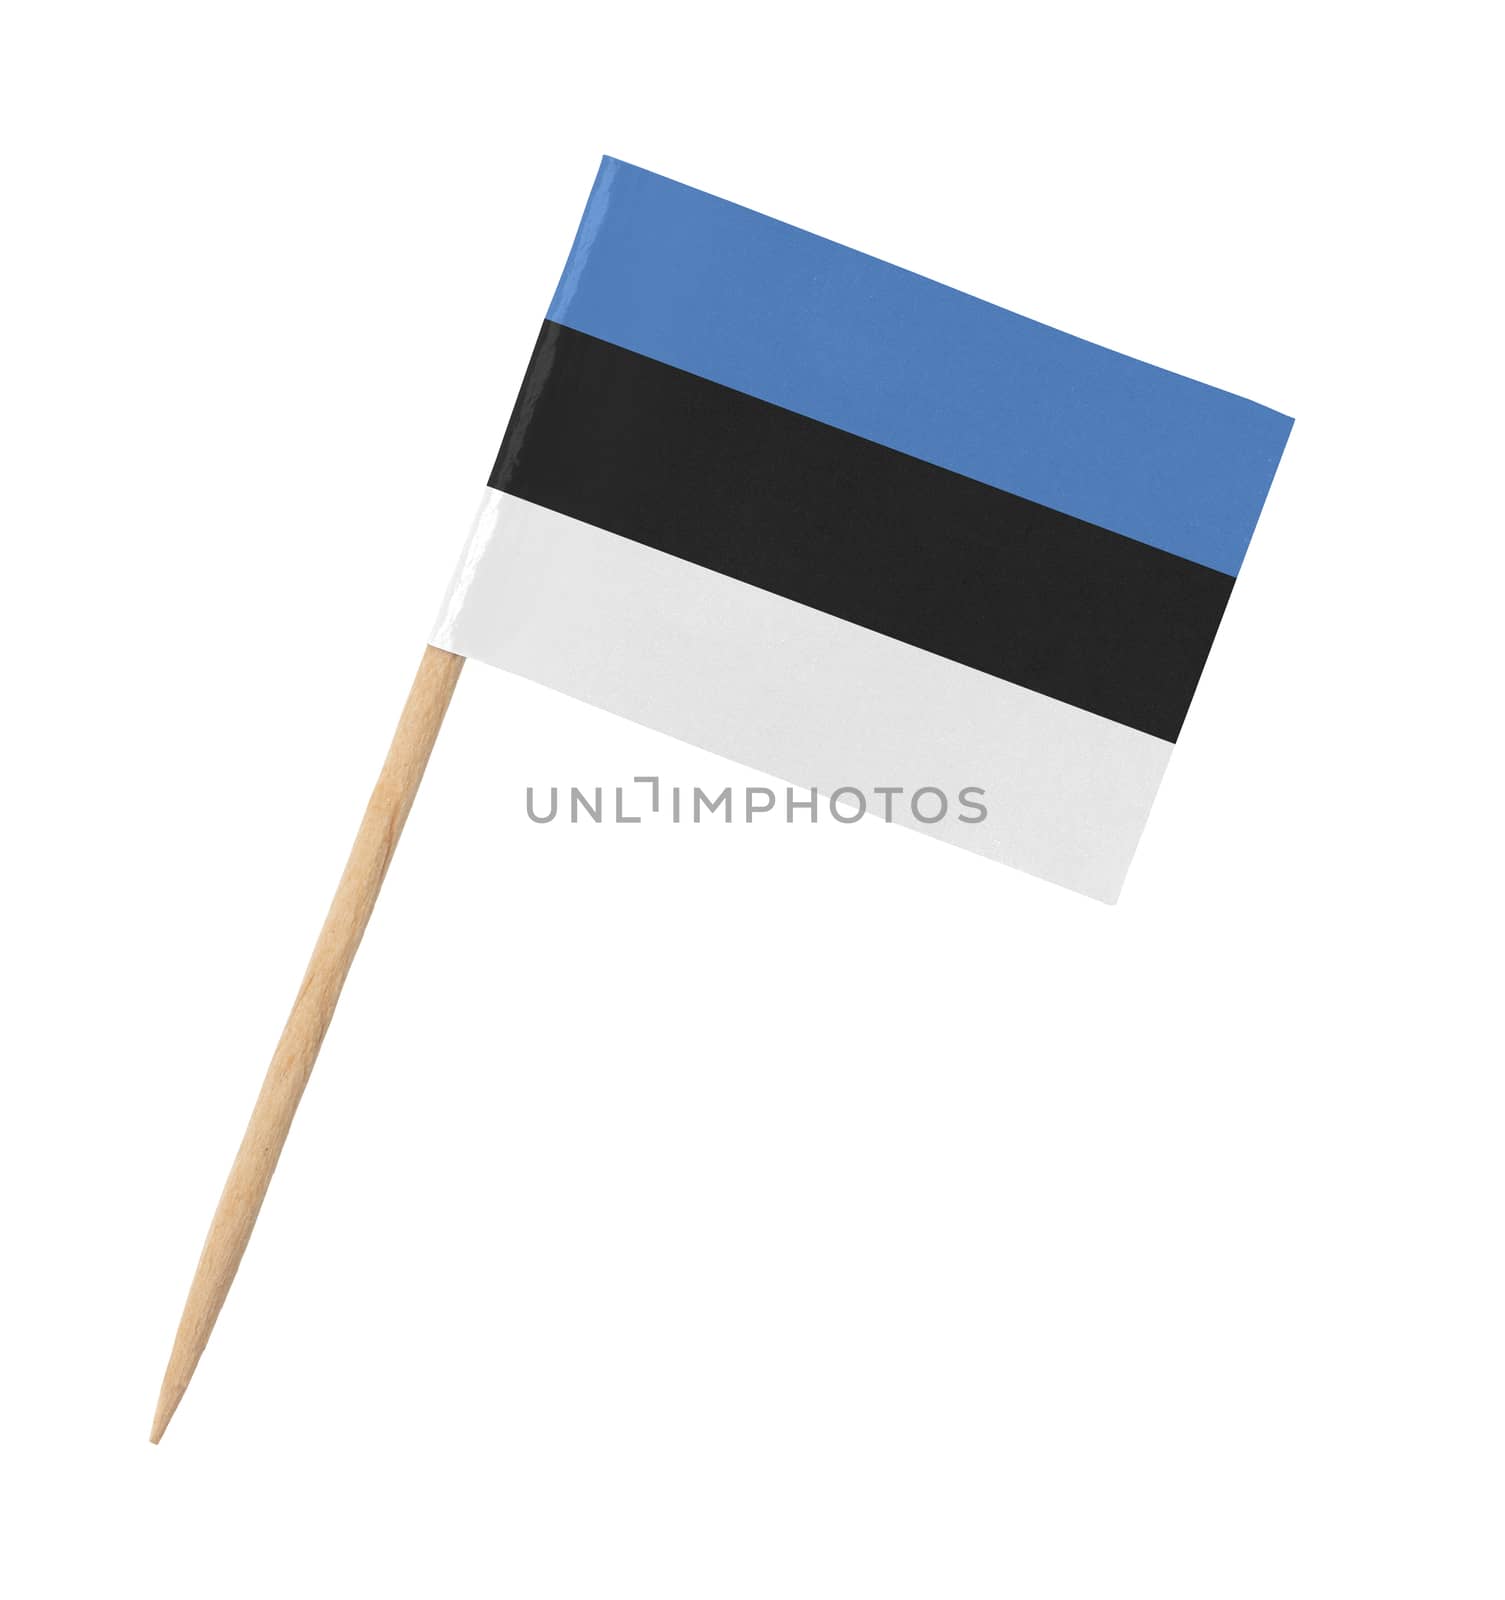 Small paper Estonian flag on wooden stick by michaklootwijk